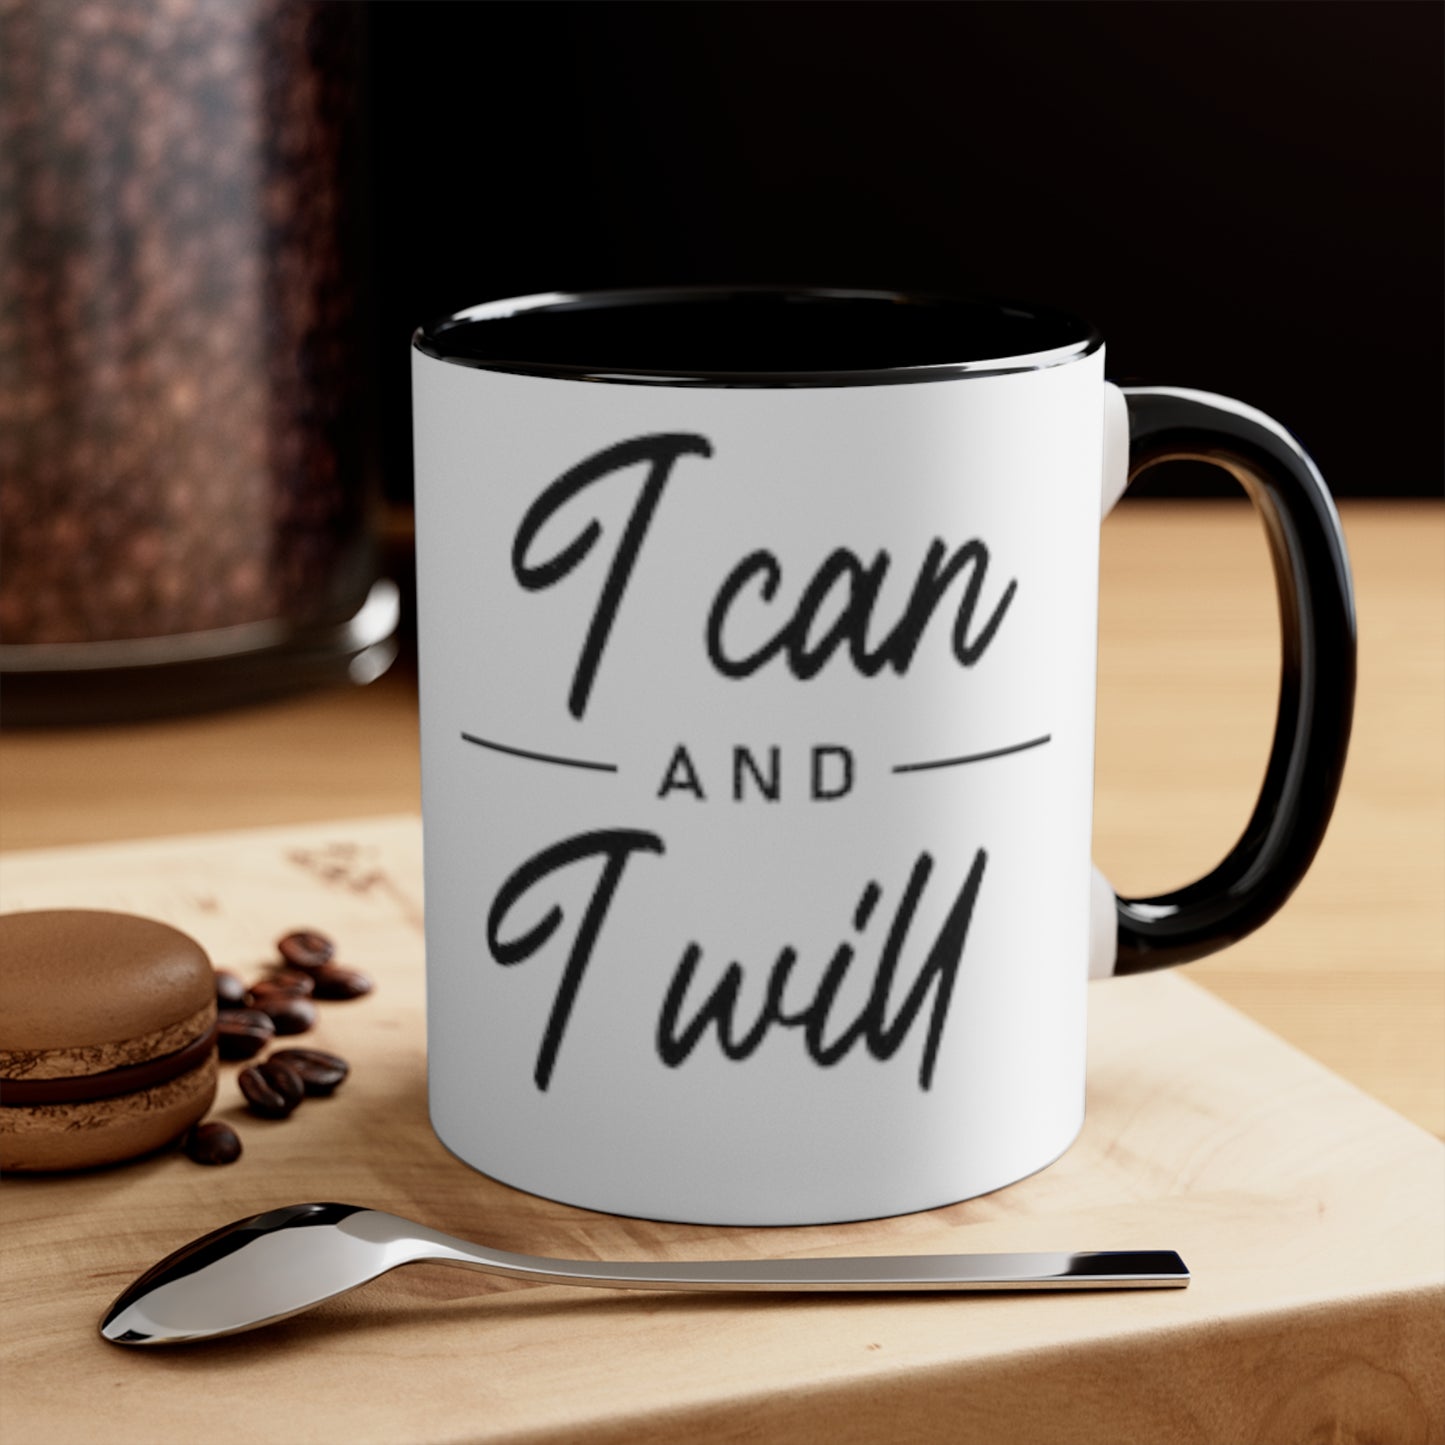 I Can and I Will Ceramic Coffee Mug, teacher gift, coworker gift, unique gift, gift for mom, funny gift, sister gift, Motivation Gift